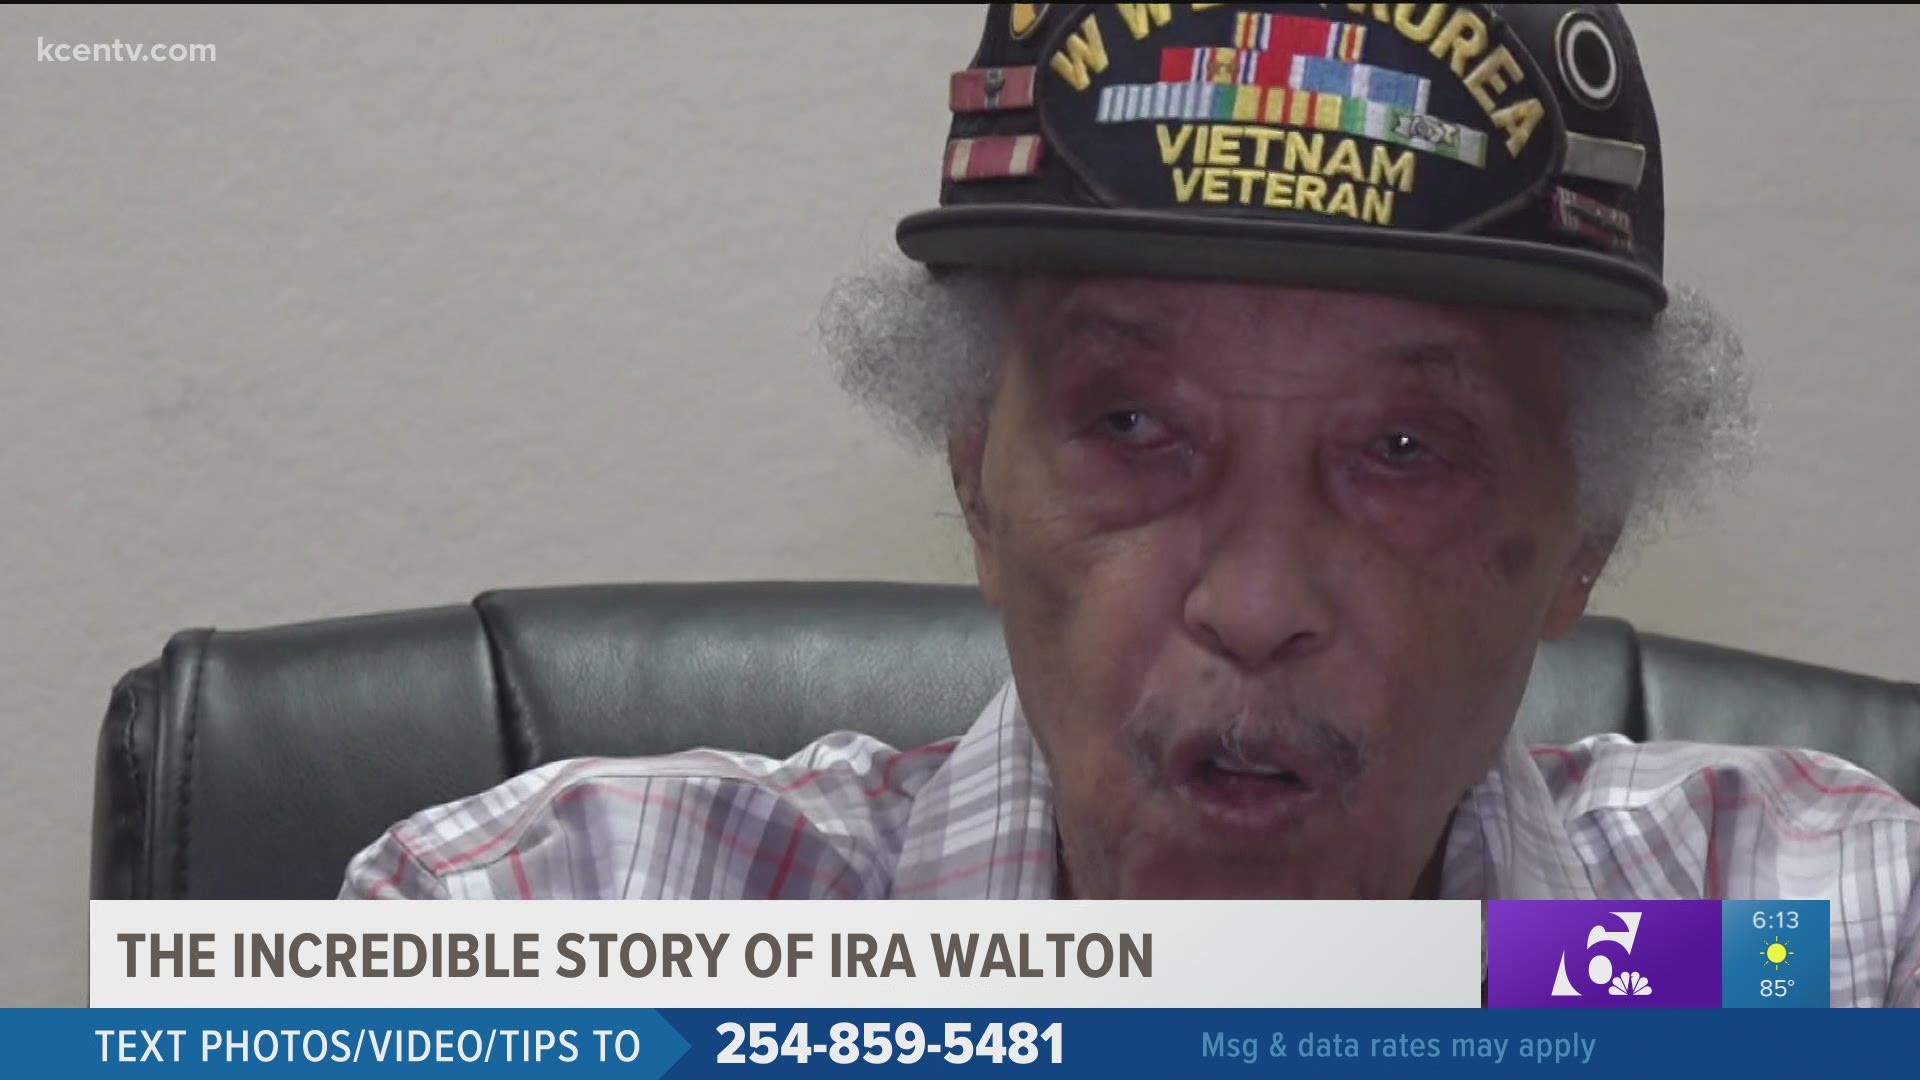 Ira Walton, 98, served in three different wars and for 30 years in the U.S. Army